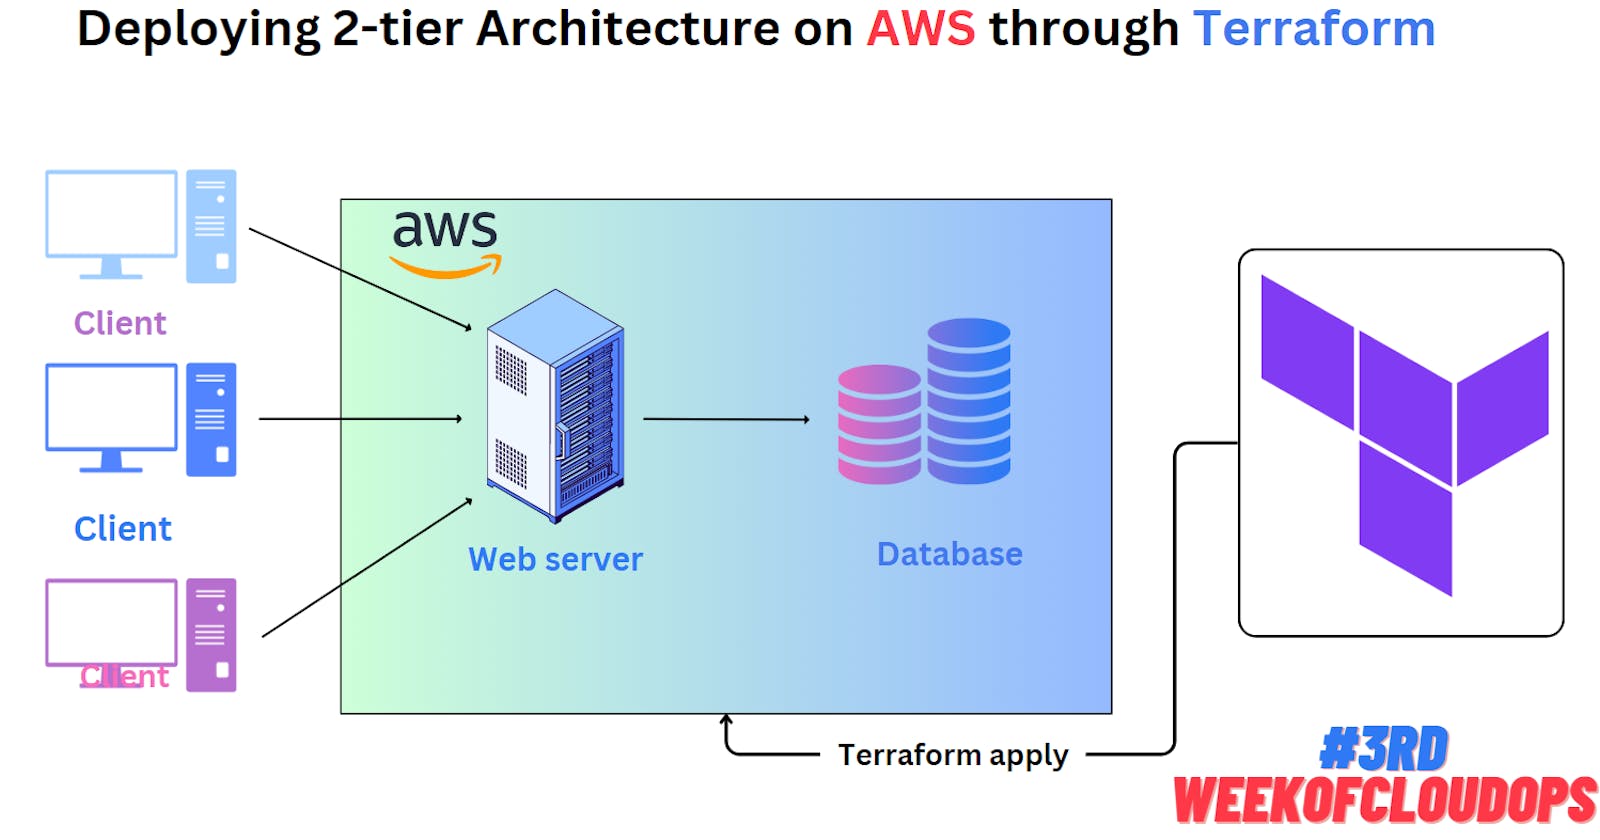 Implementing Two-Tier Architecture in AWS with Terraform: Step-by-Step Guide
#10weeksofCloudOps